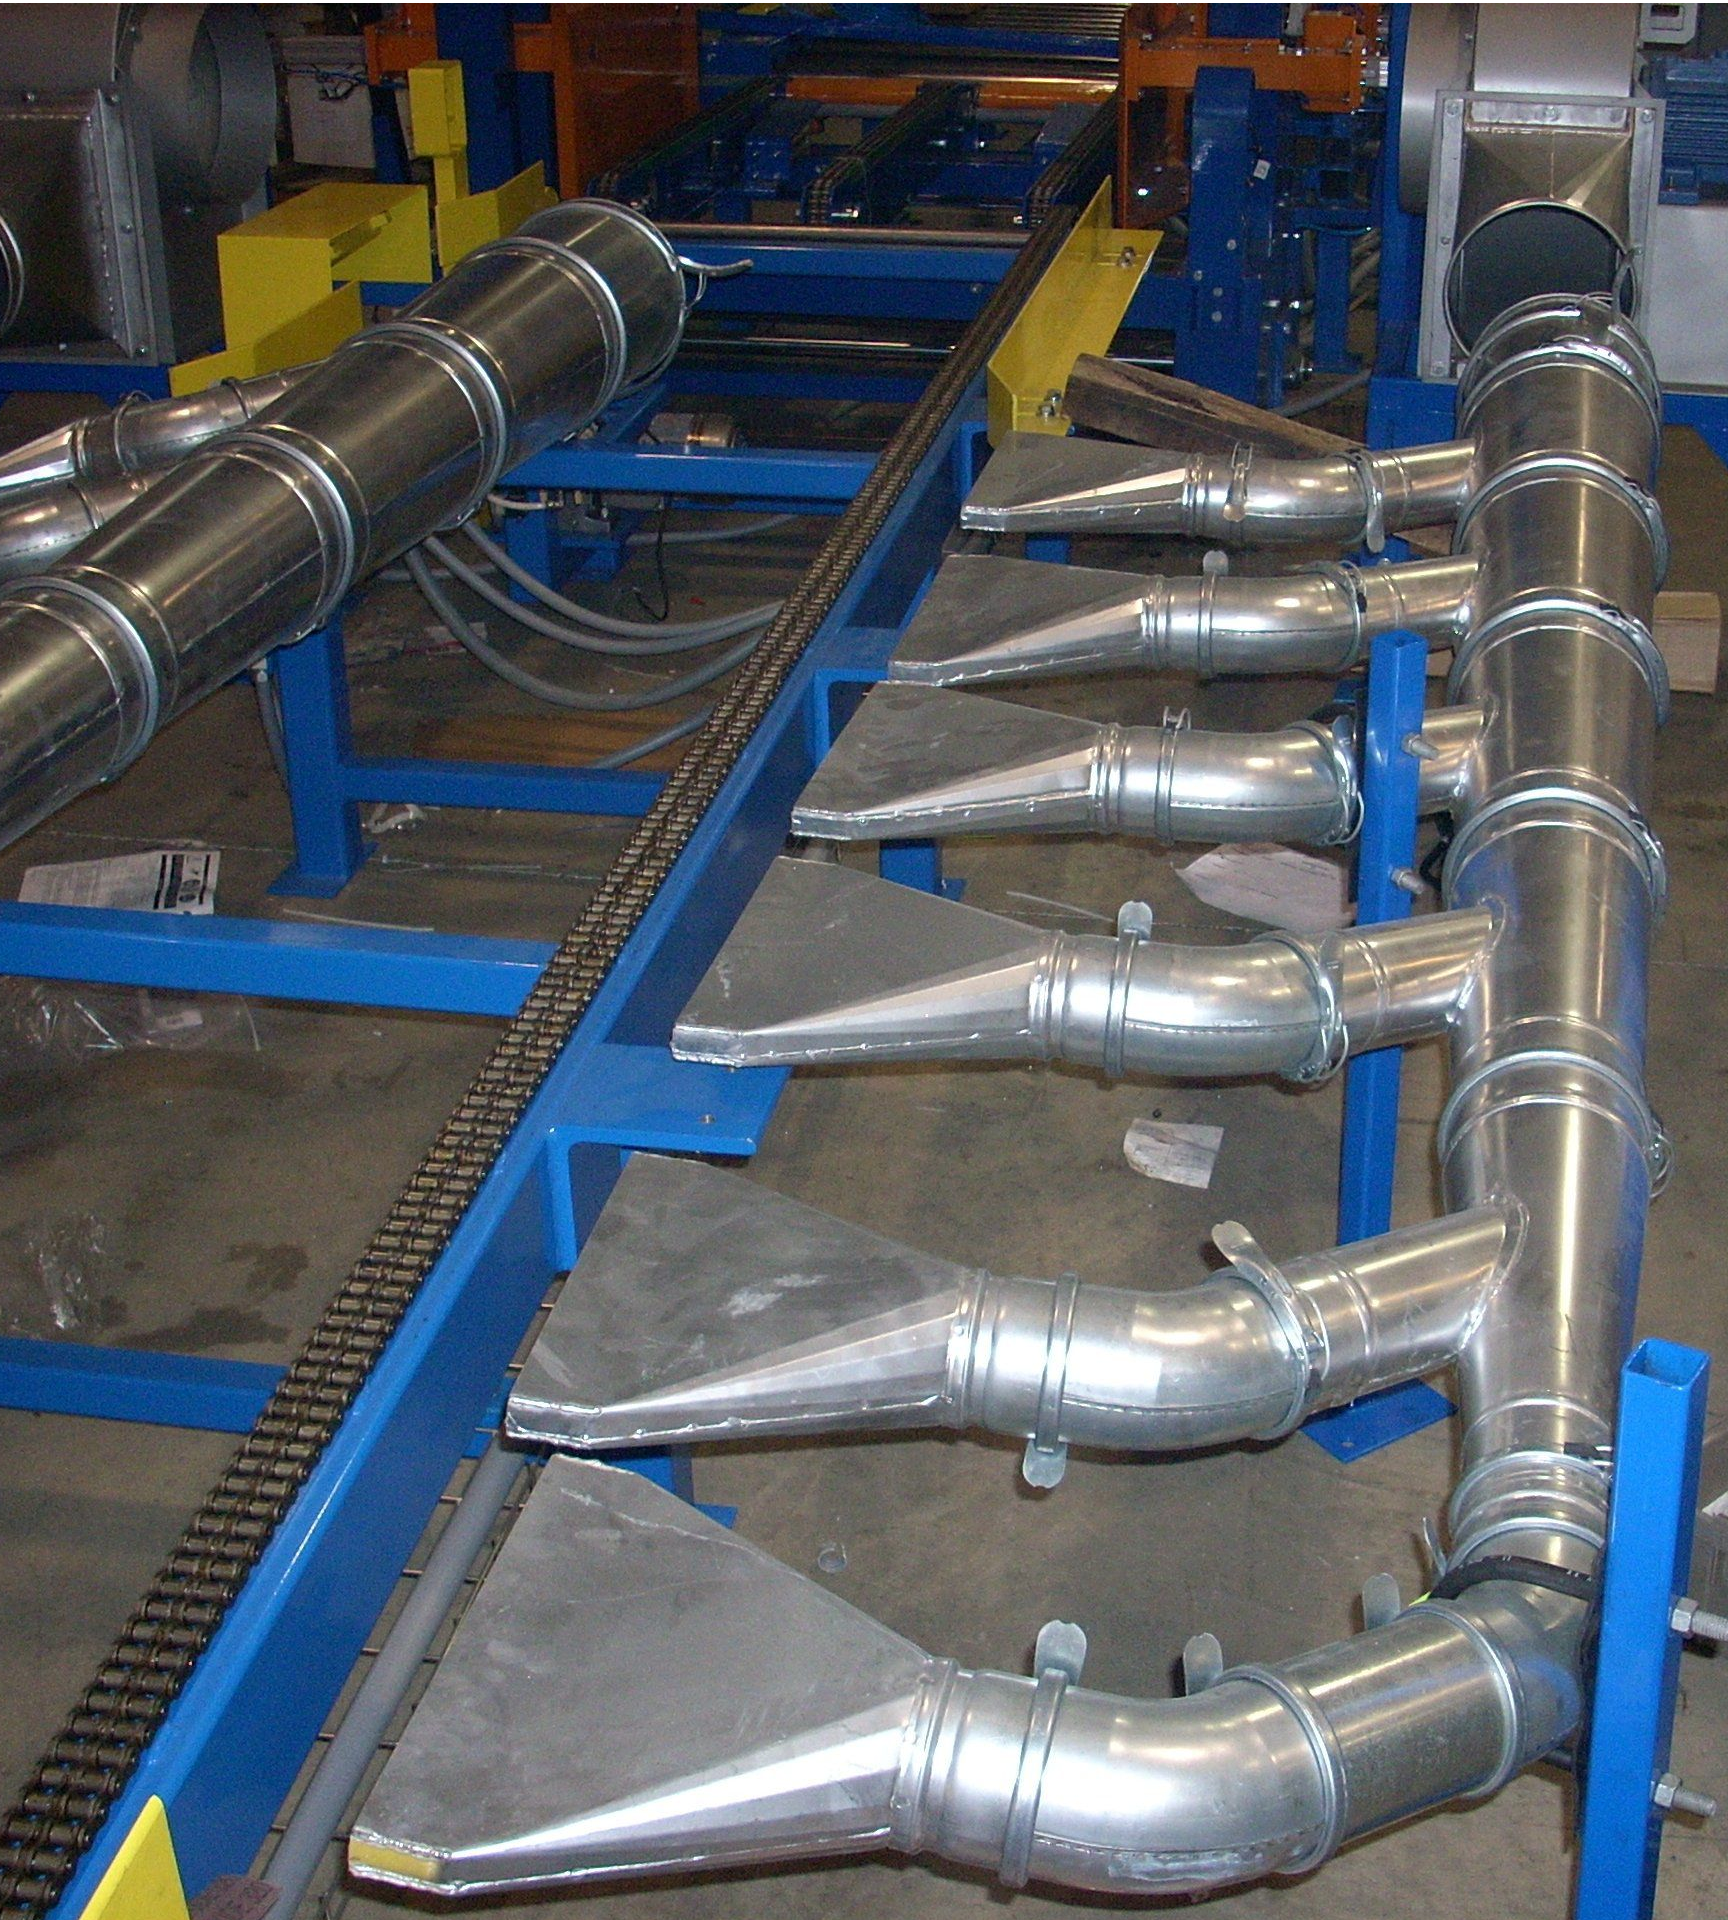 Galvanized ductwork system installed in an industrial facility.